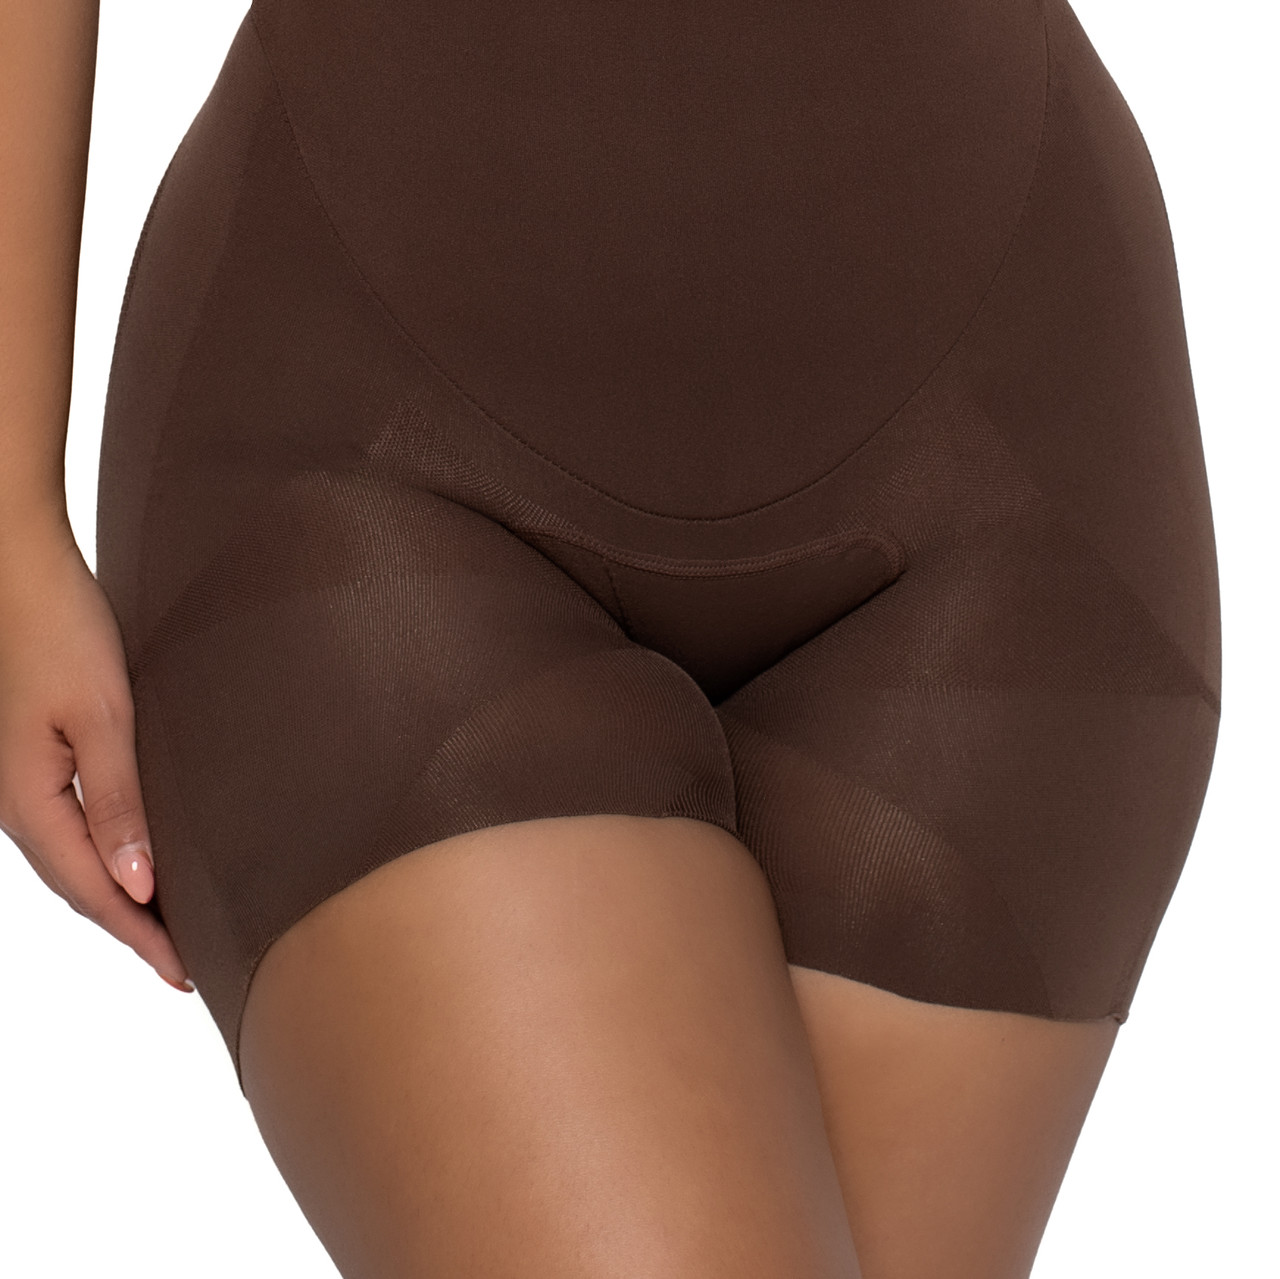 YAHAIRA HAPPY BUTT NO.7 NUDE COLOR~never worn, could - Depop